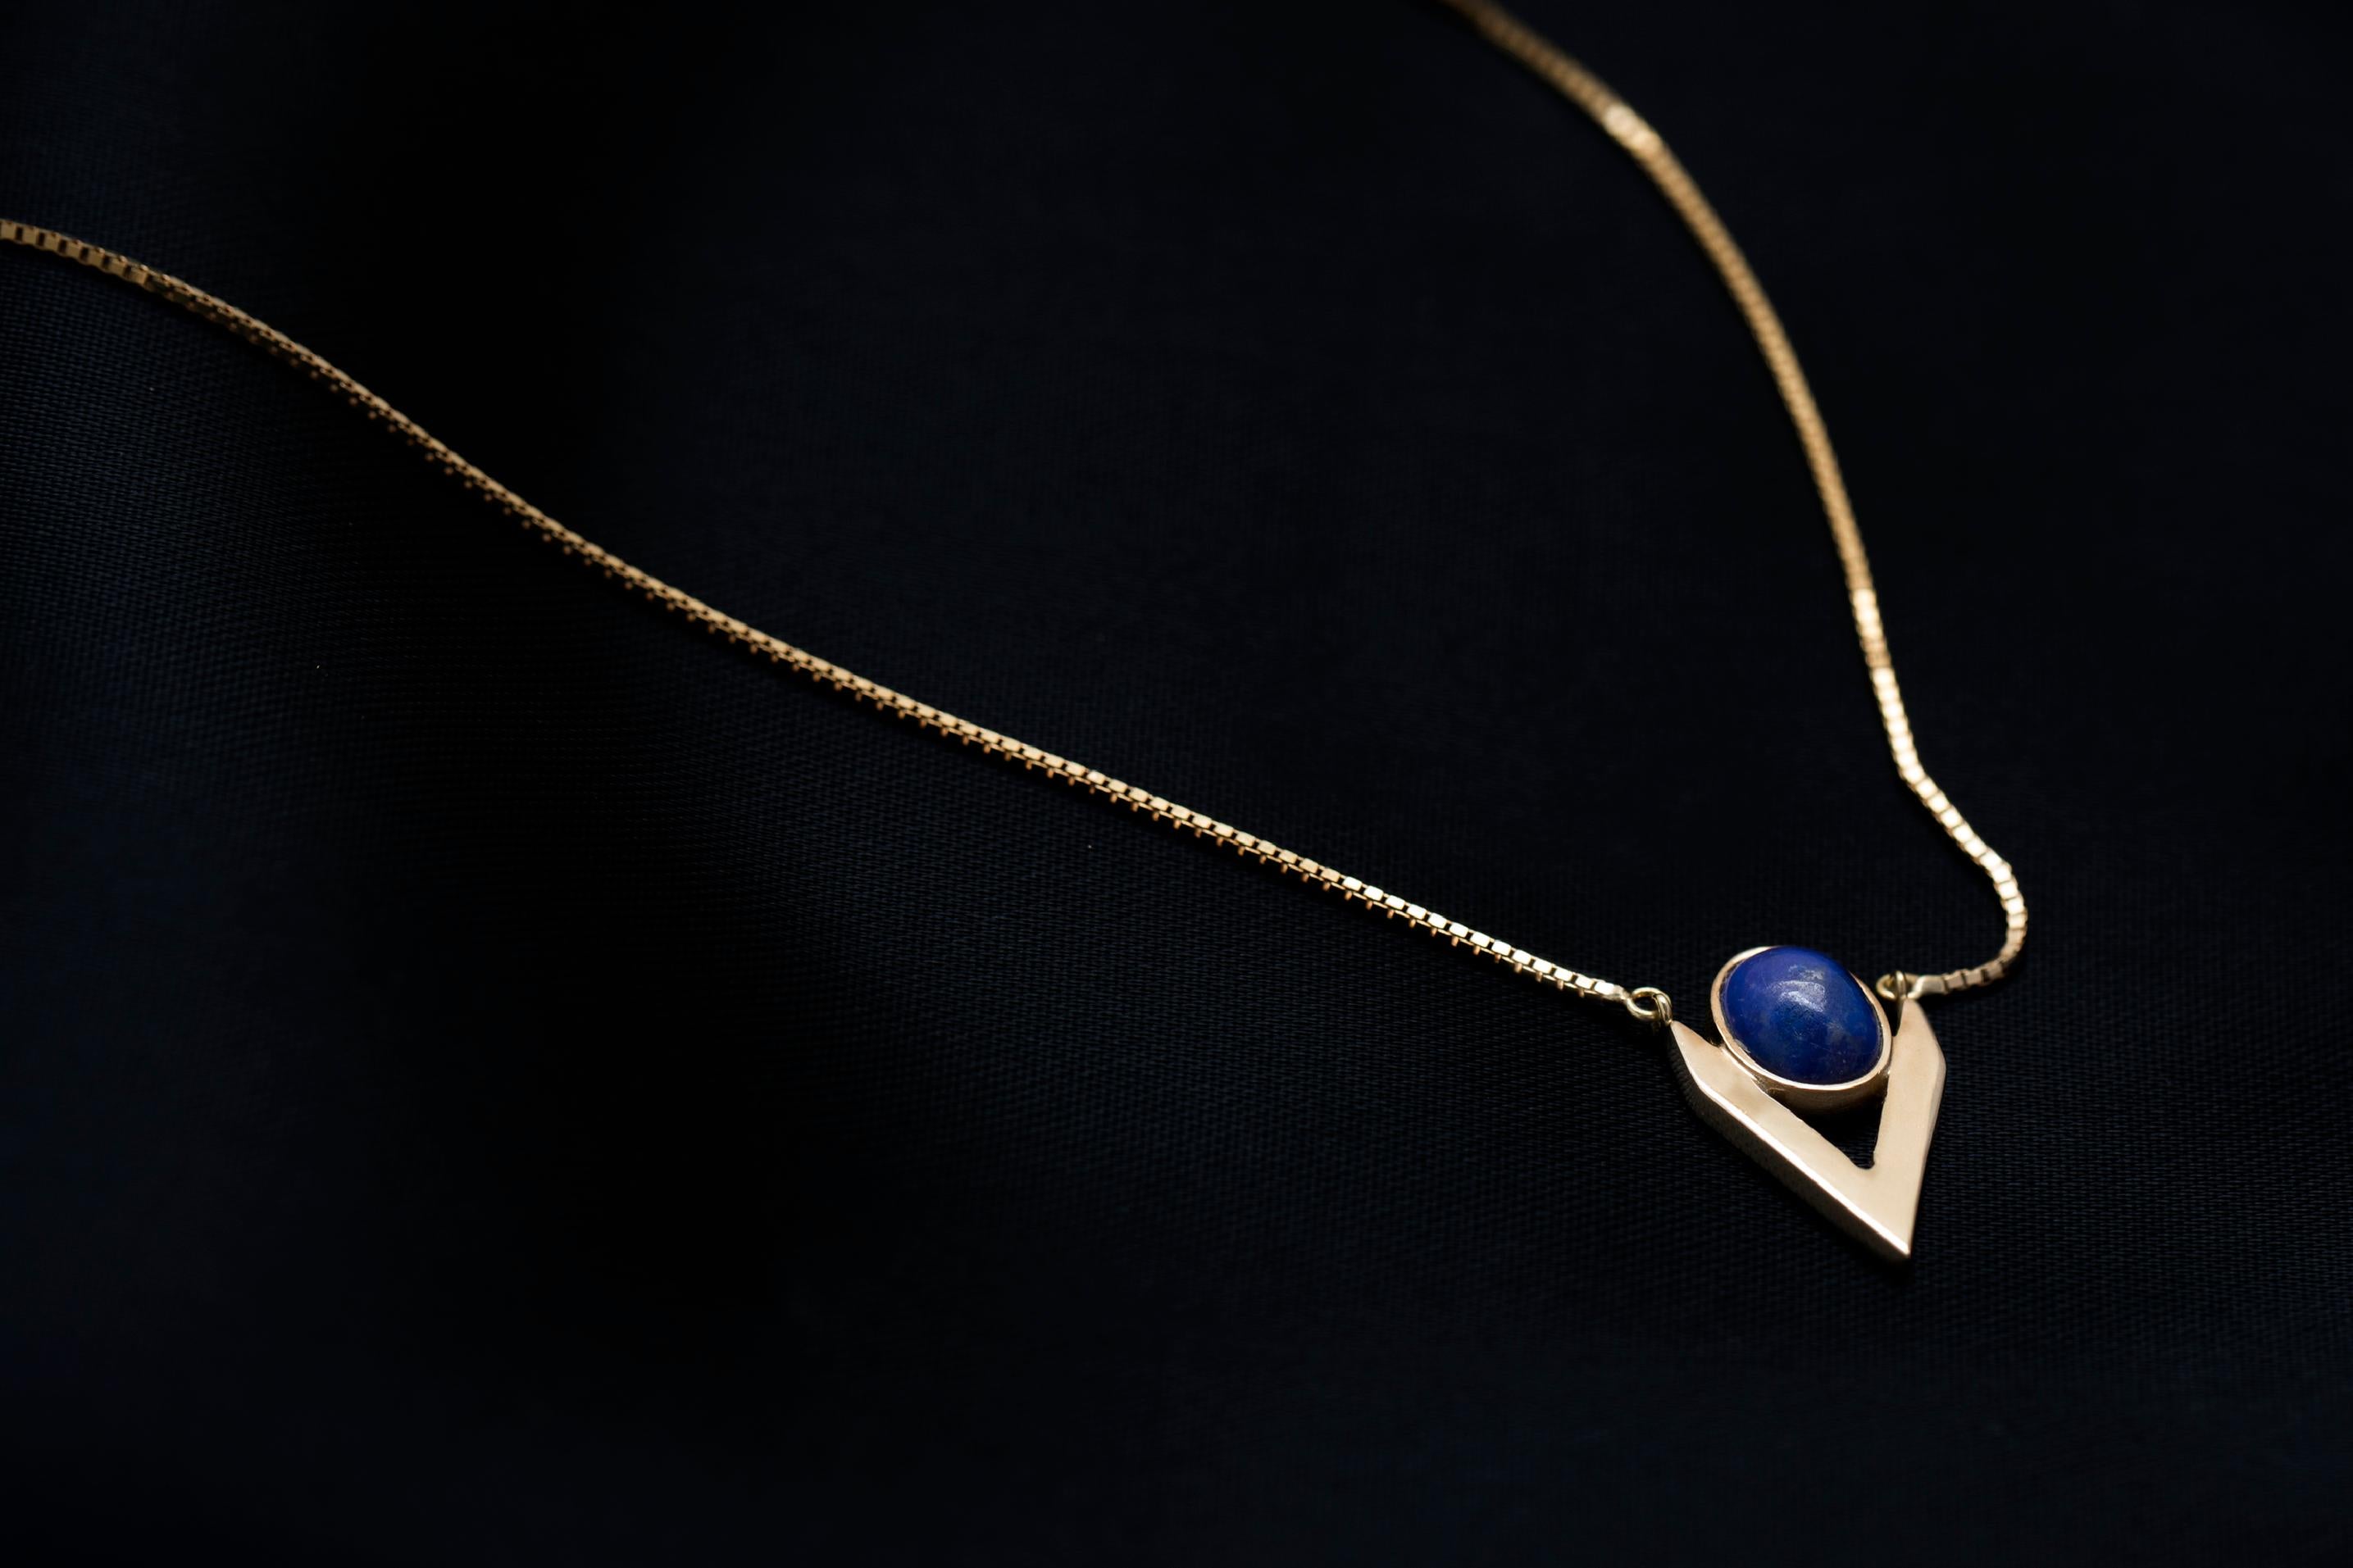 Perfect as gifts of love, Iosselliani jewellery pieces are intended to be the new classic with an edgy style. Designed with a 9 Karat gold chain, the necklace features a lapis lazuli cabochon framed into a V shape. Bringing geometry to your look